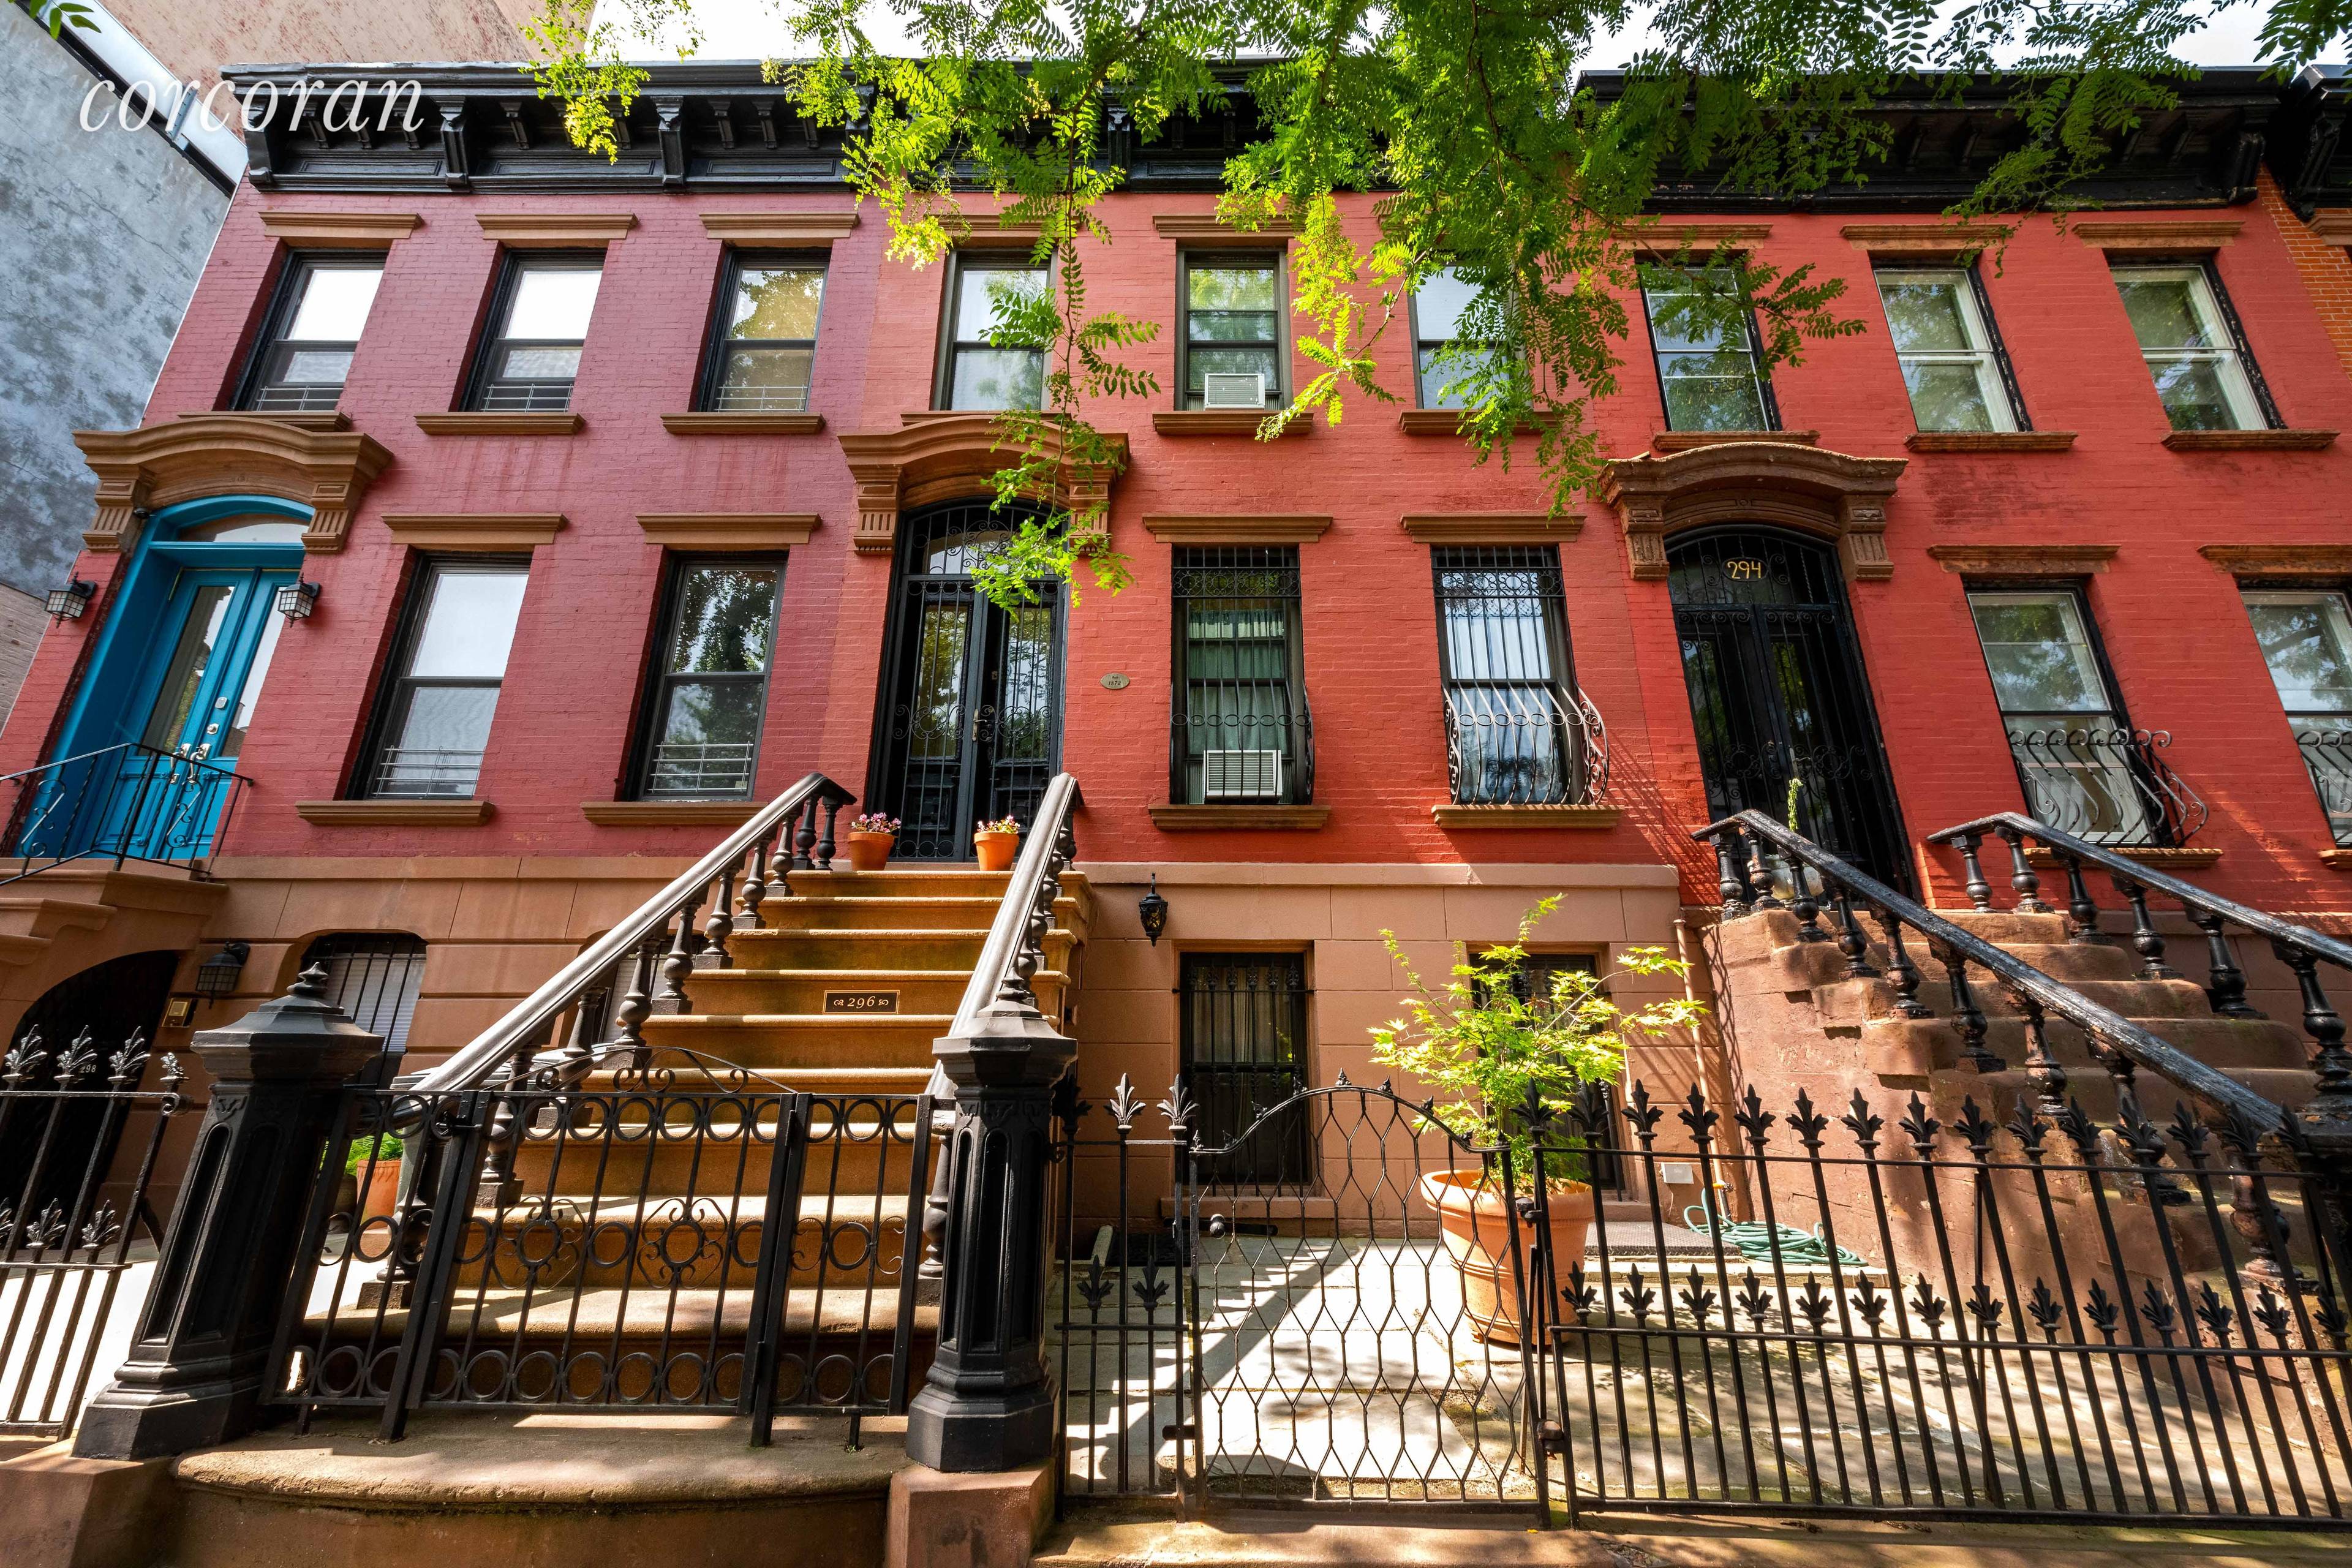 Finally, the ultimate charming Park Slope townhouse that has already been renovated and is ready to move into.